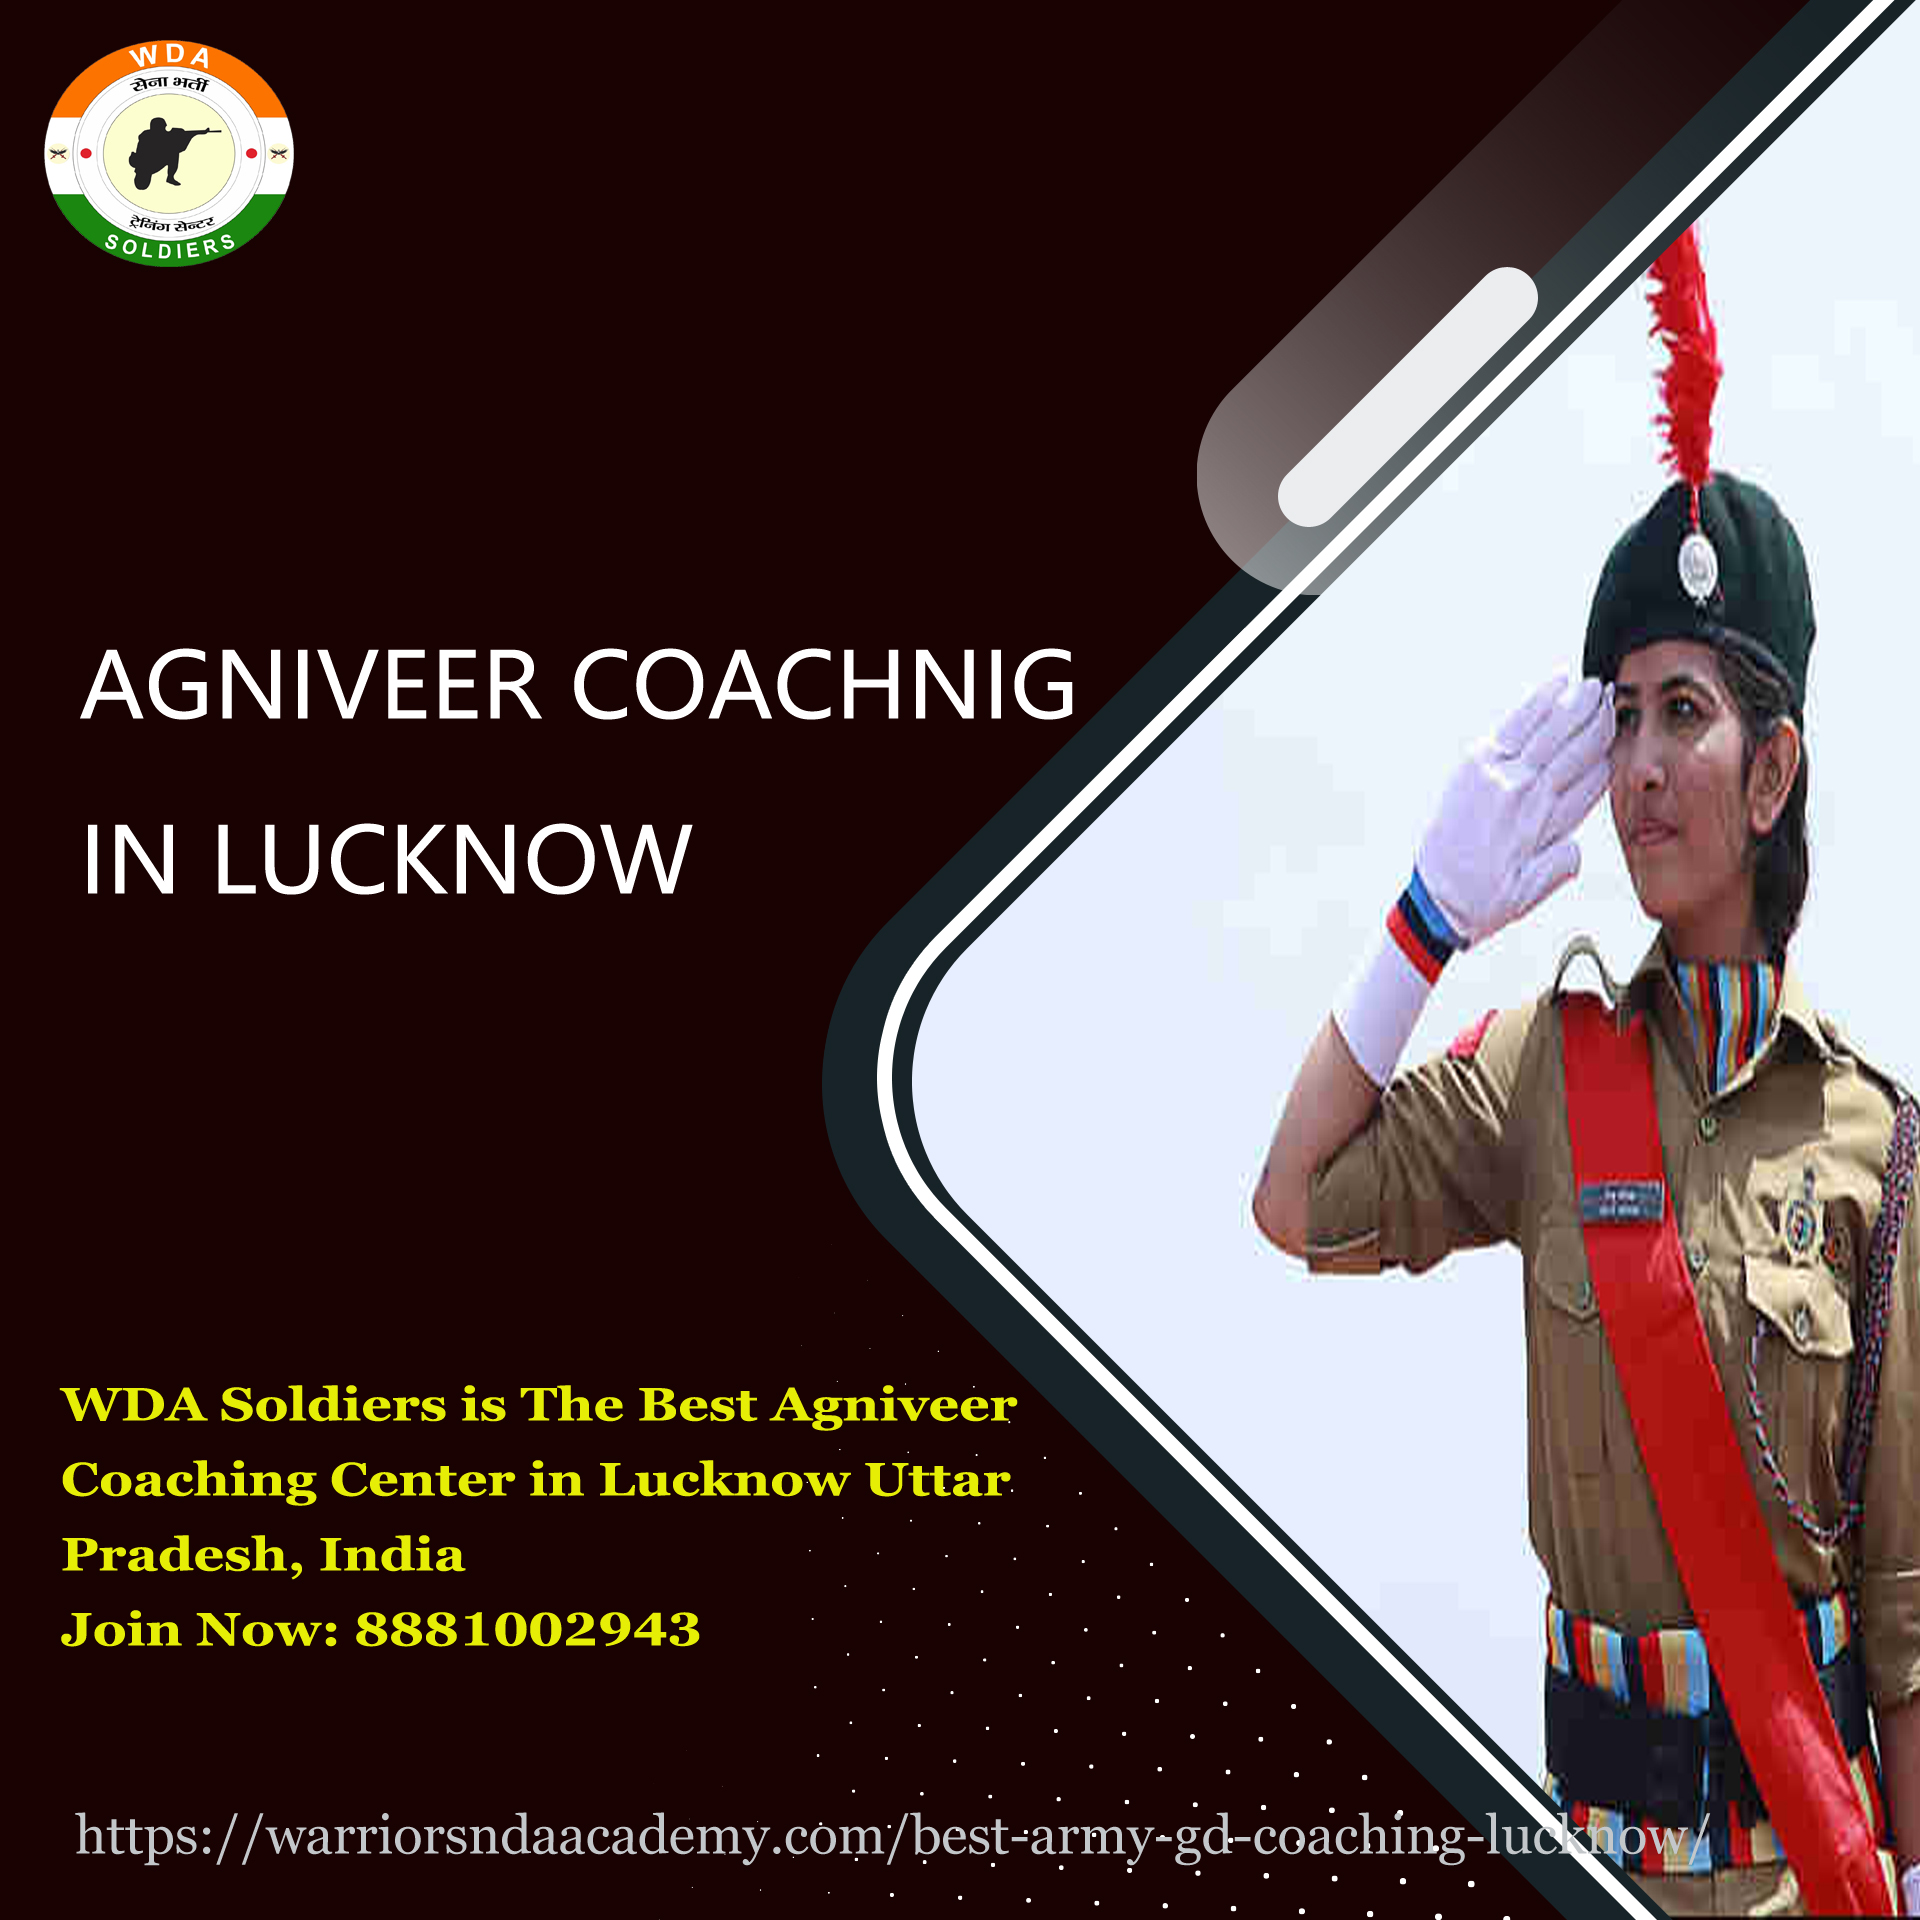 Agniveer Coaching in Lucknow | Best Army GD Coaching in Lucknow